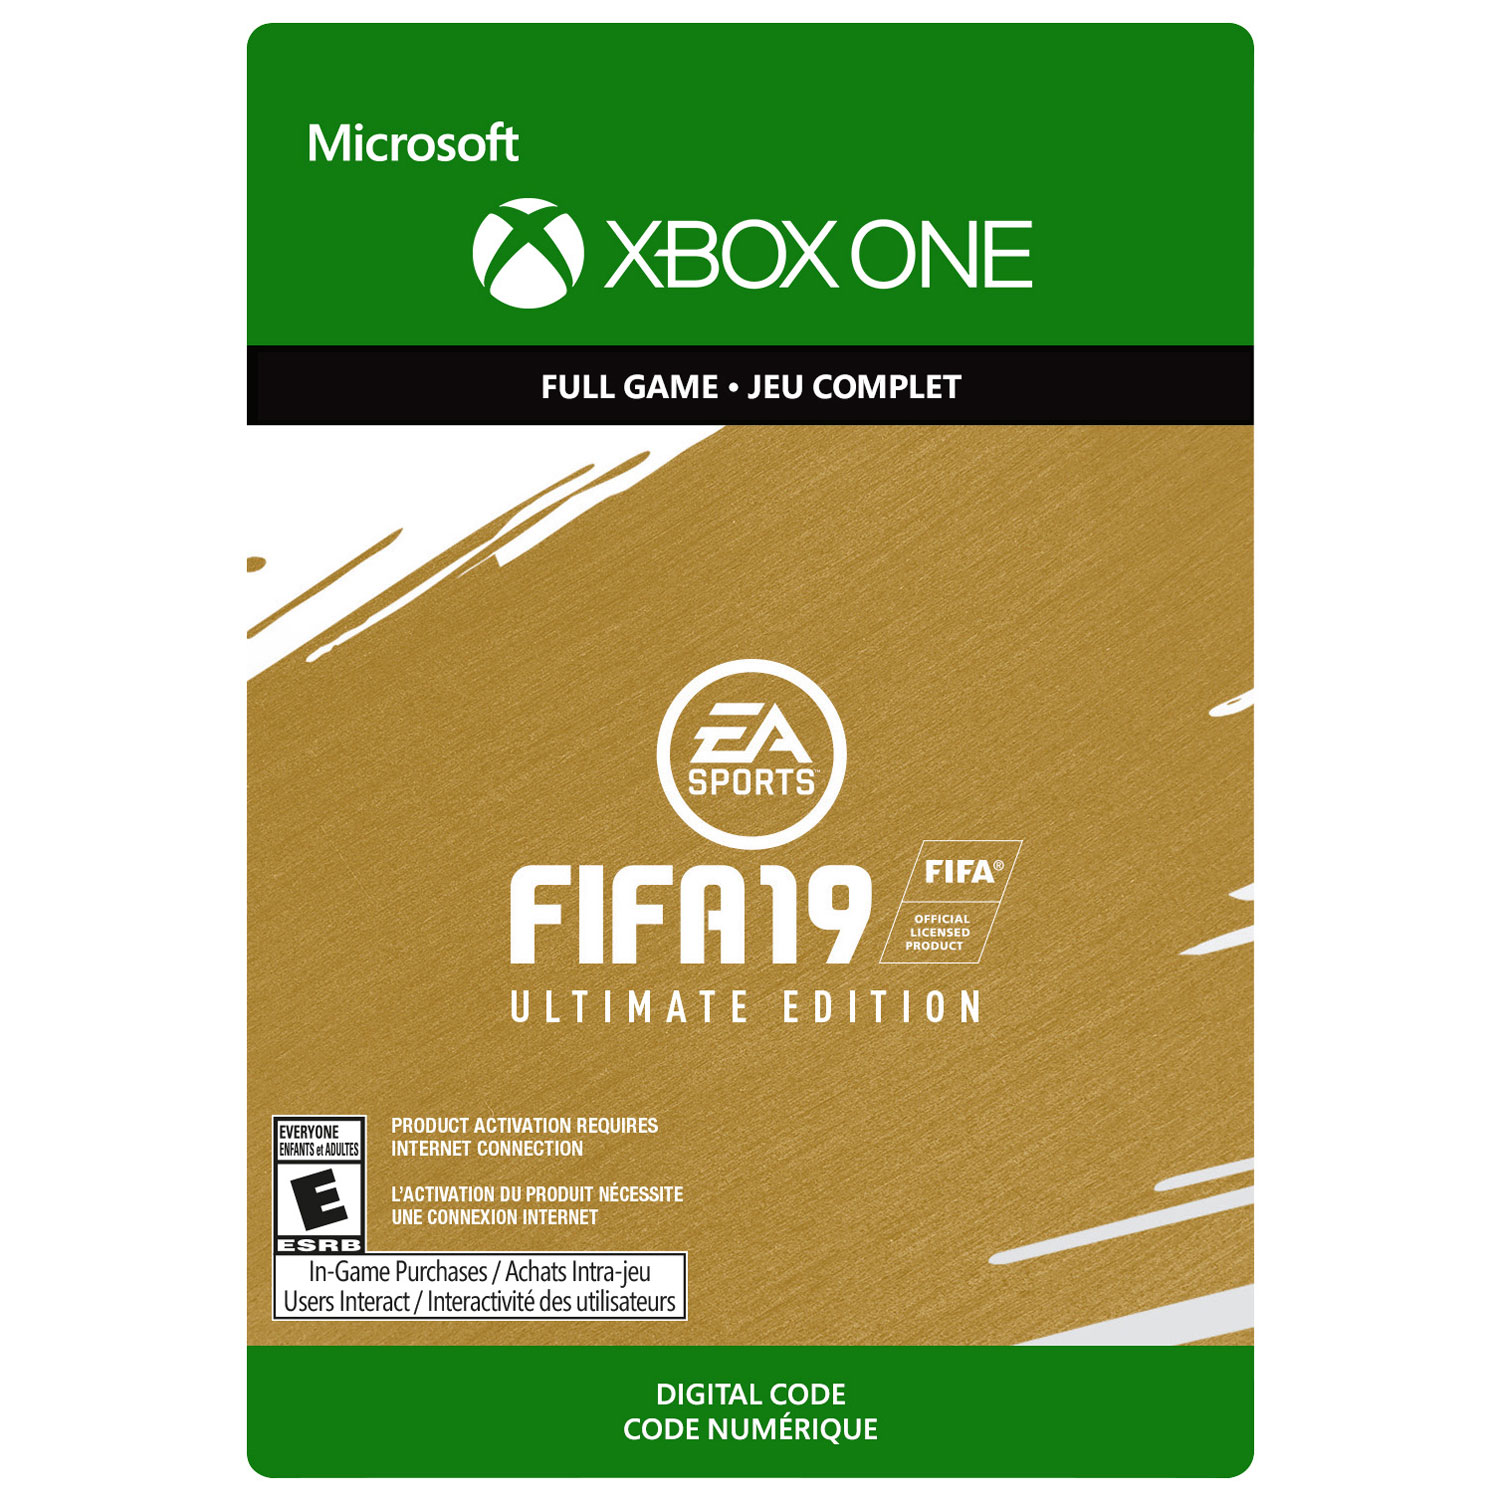 FIFA 19 Ultimate Edition (Xbox One) - Digital Download